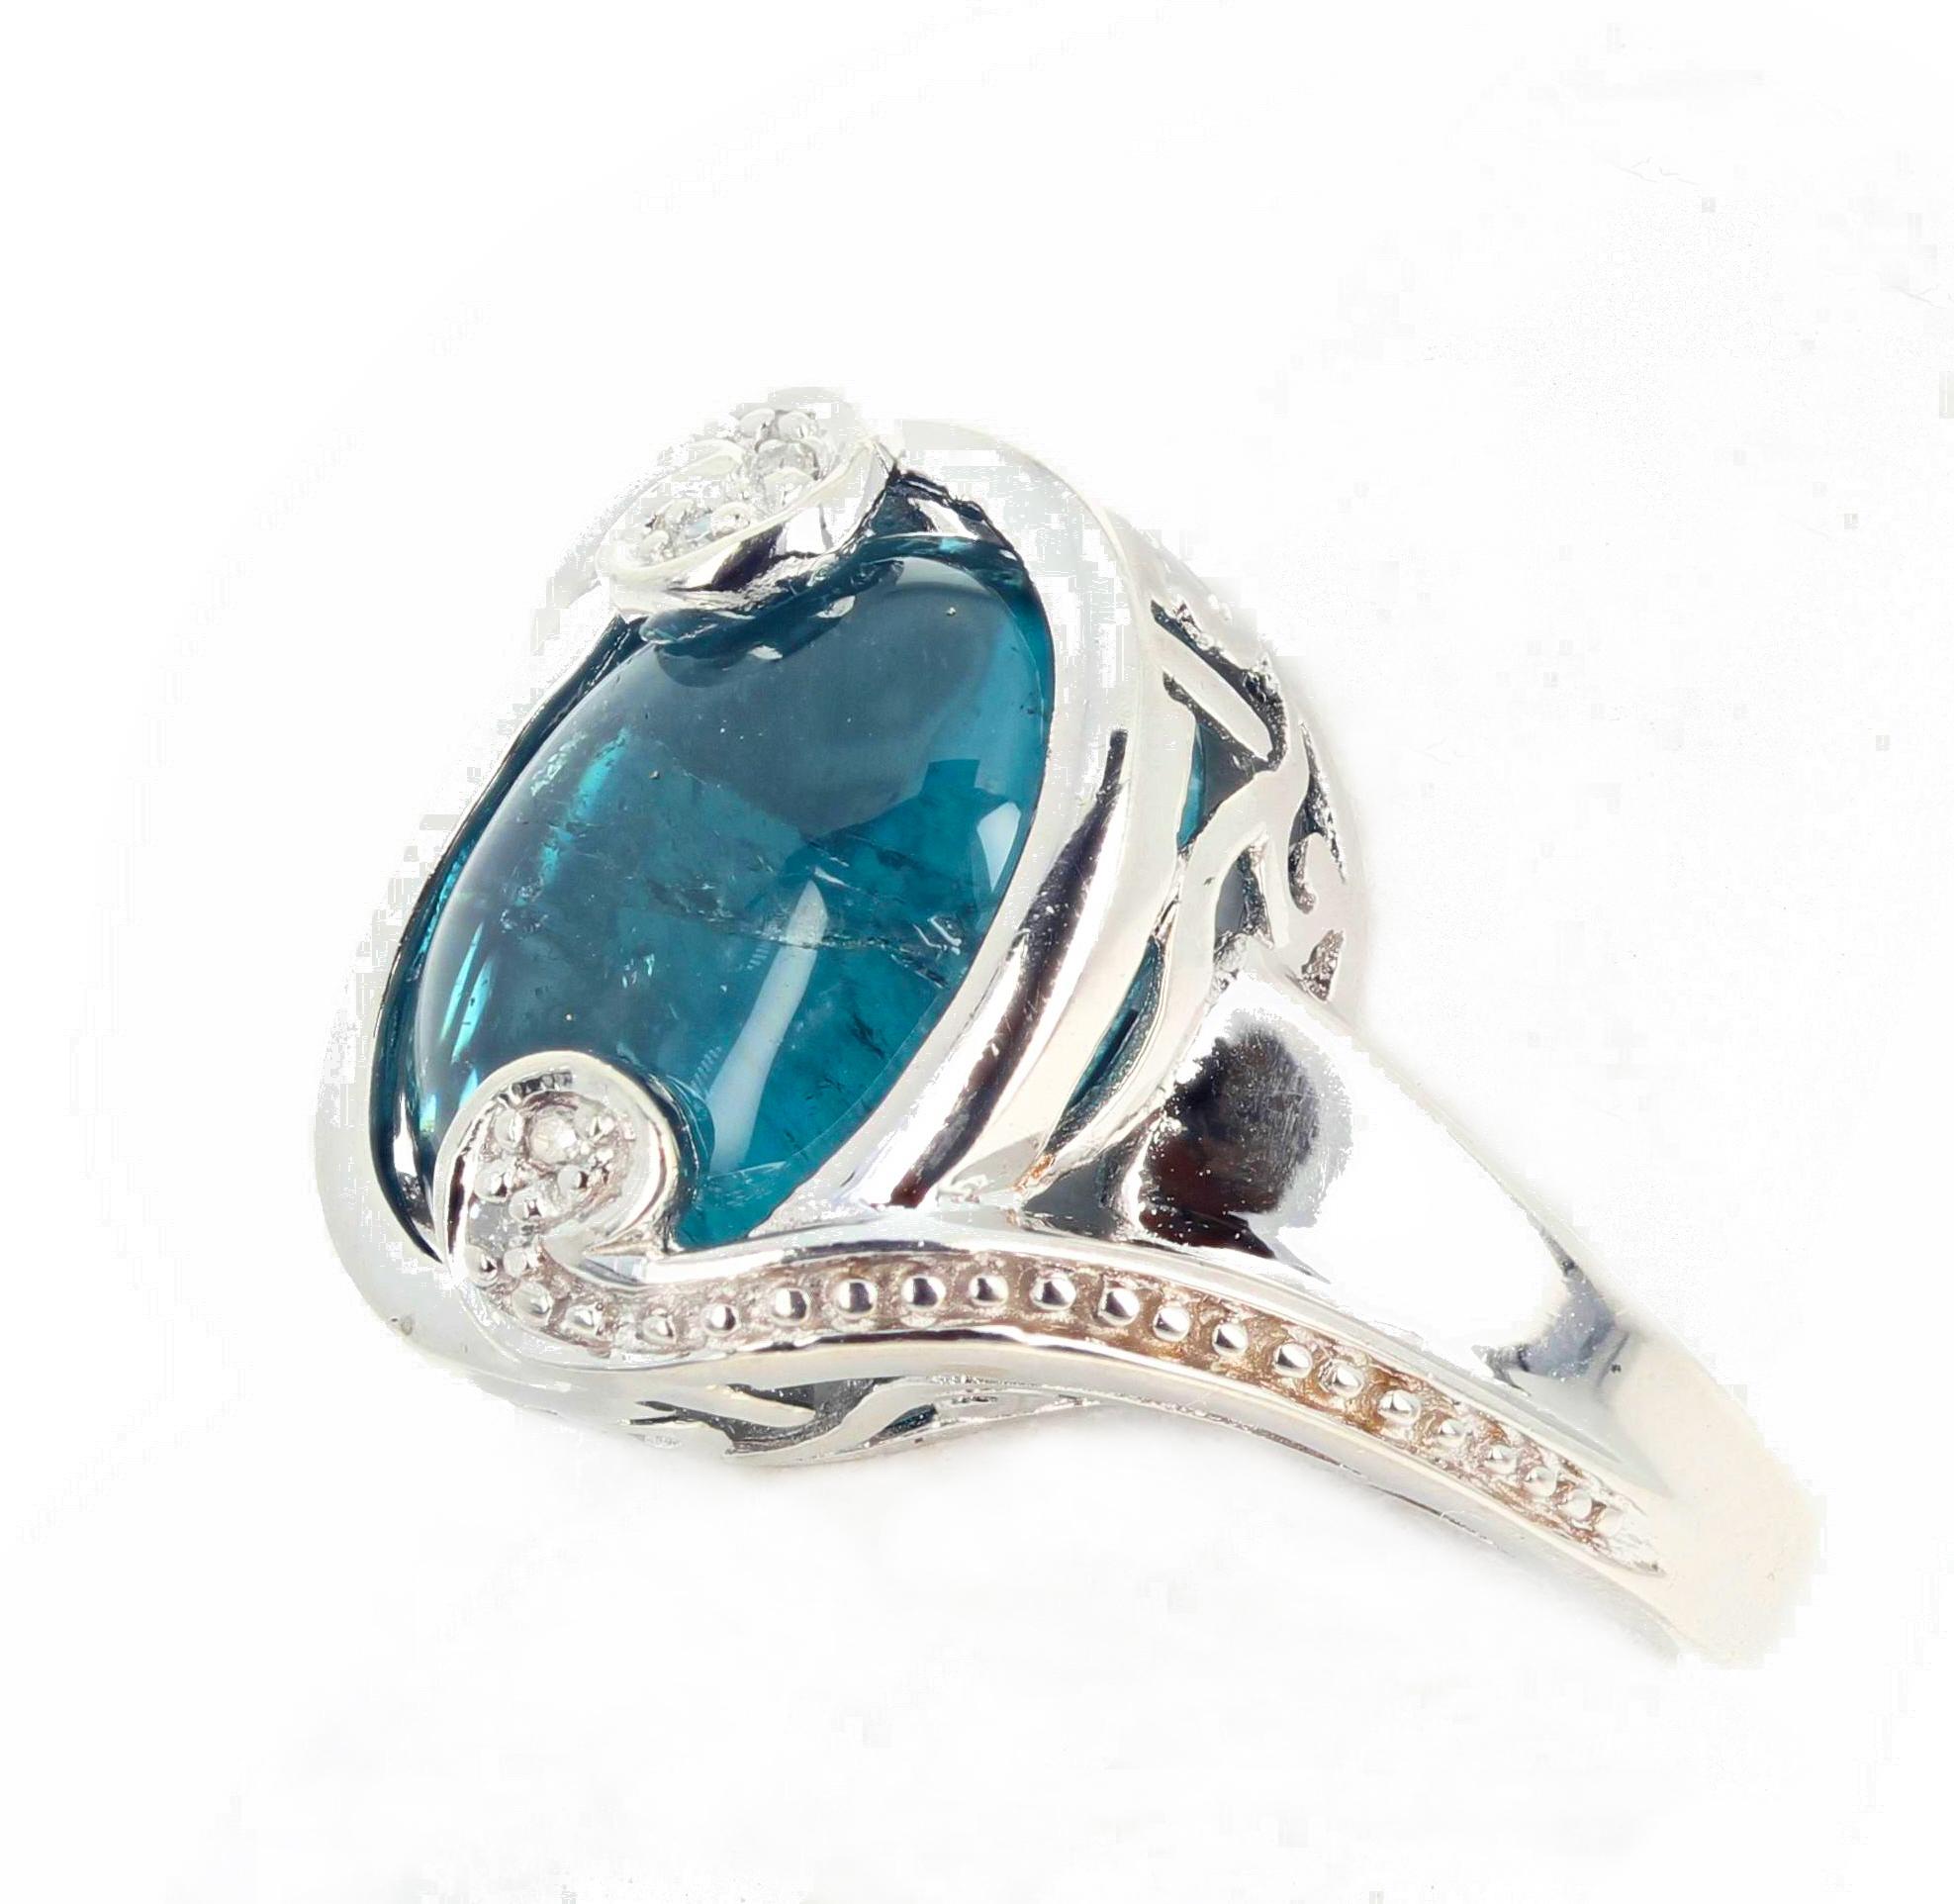 Beautiful glowing cabochon cut blue Indicolite Tourmaline (13 mm x 11 mm) accented with teeny tiny little white Diamonds set in this beautiful platinum plated sterling silver ring size 5 sizable for free.  This is so translucent you can see through